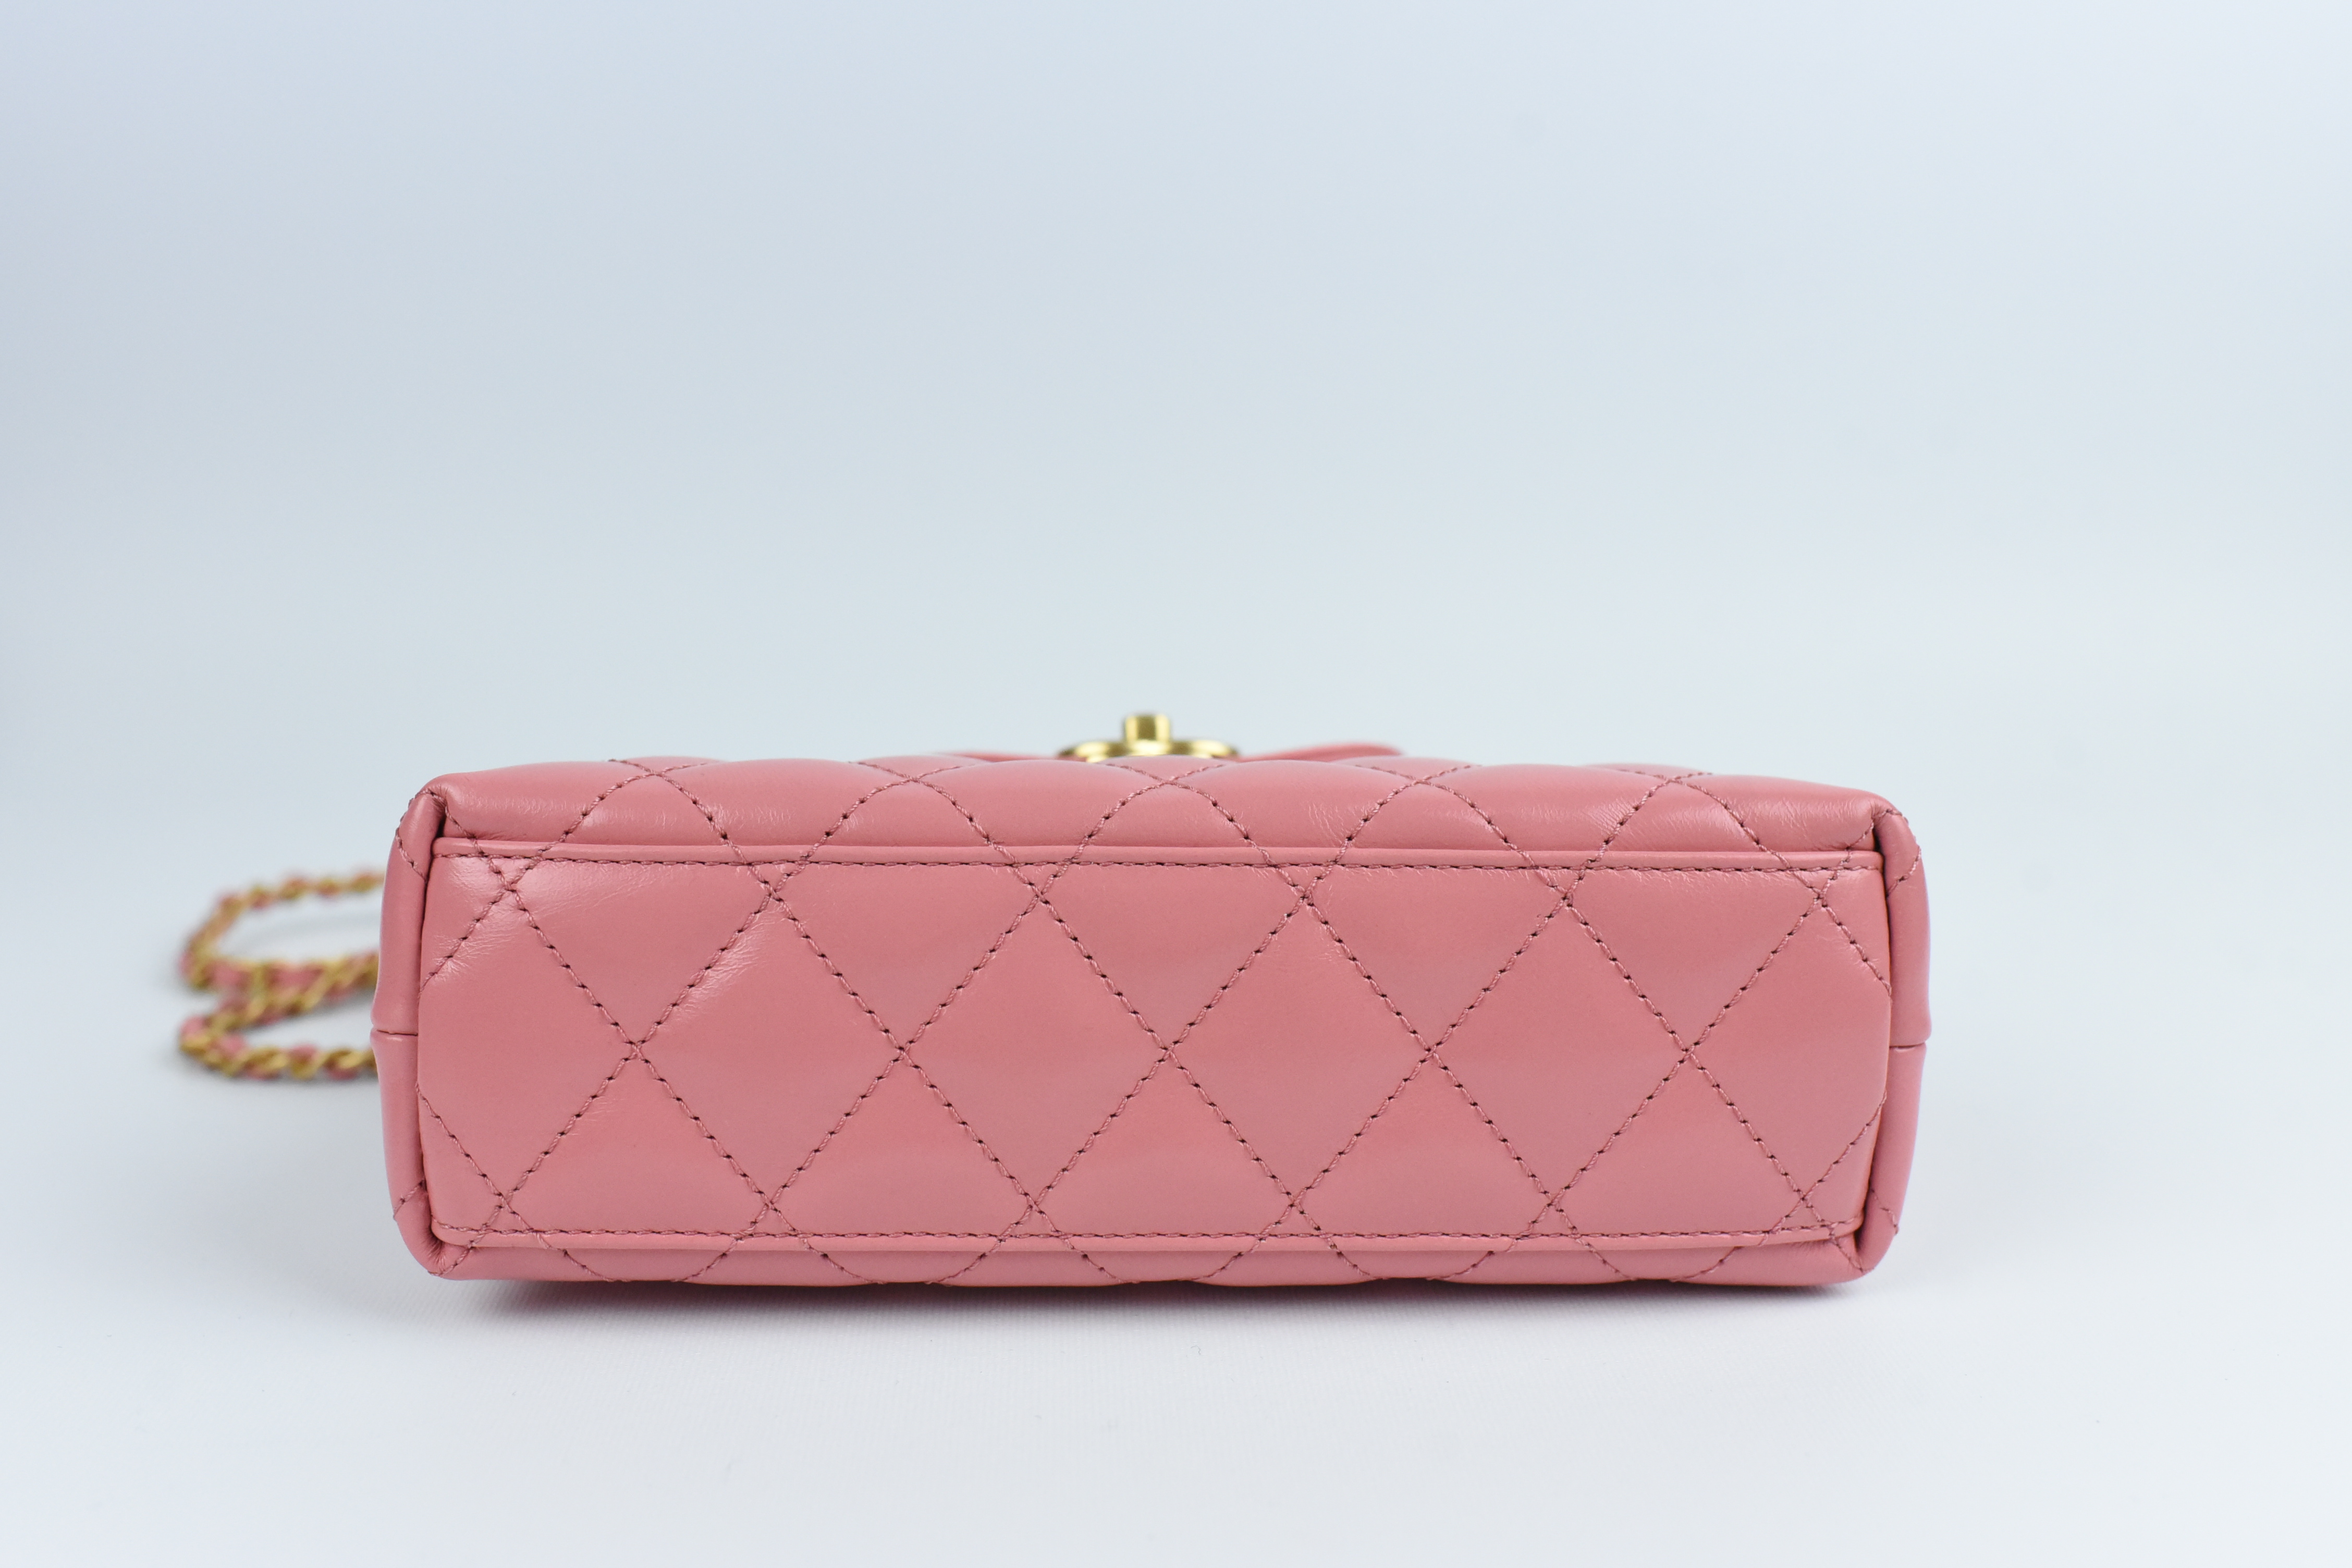 Chanel Kelly Bag Small, Pink Calfskin Leather with Gold Hardware, New In Box  GA003 - Julia Rose Boston